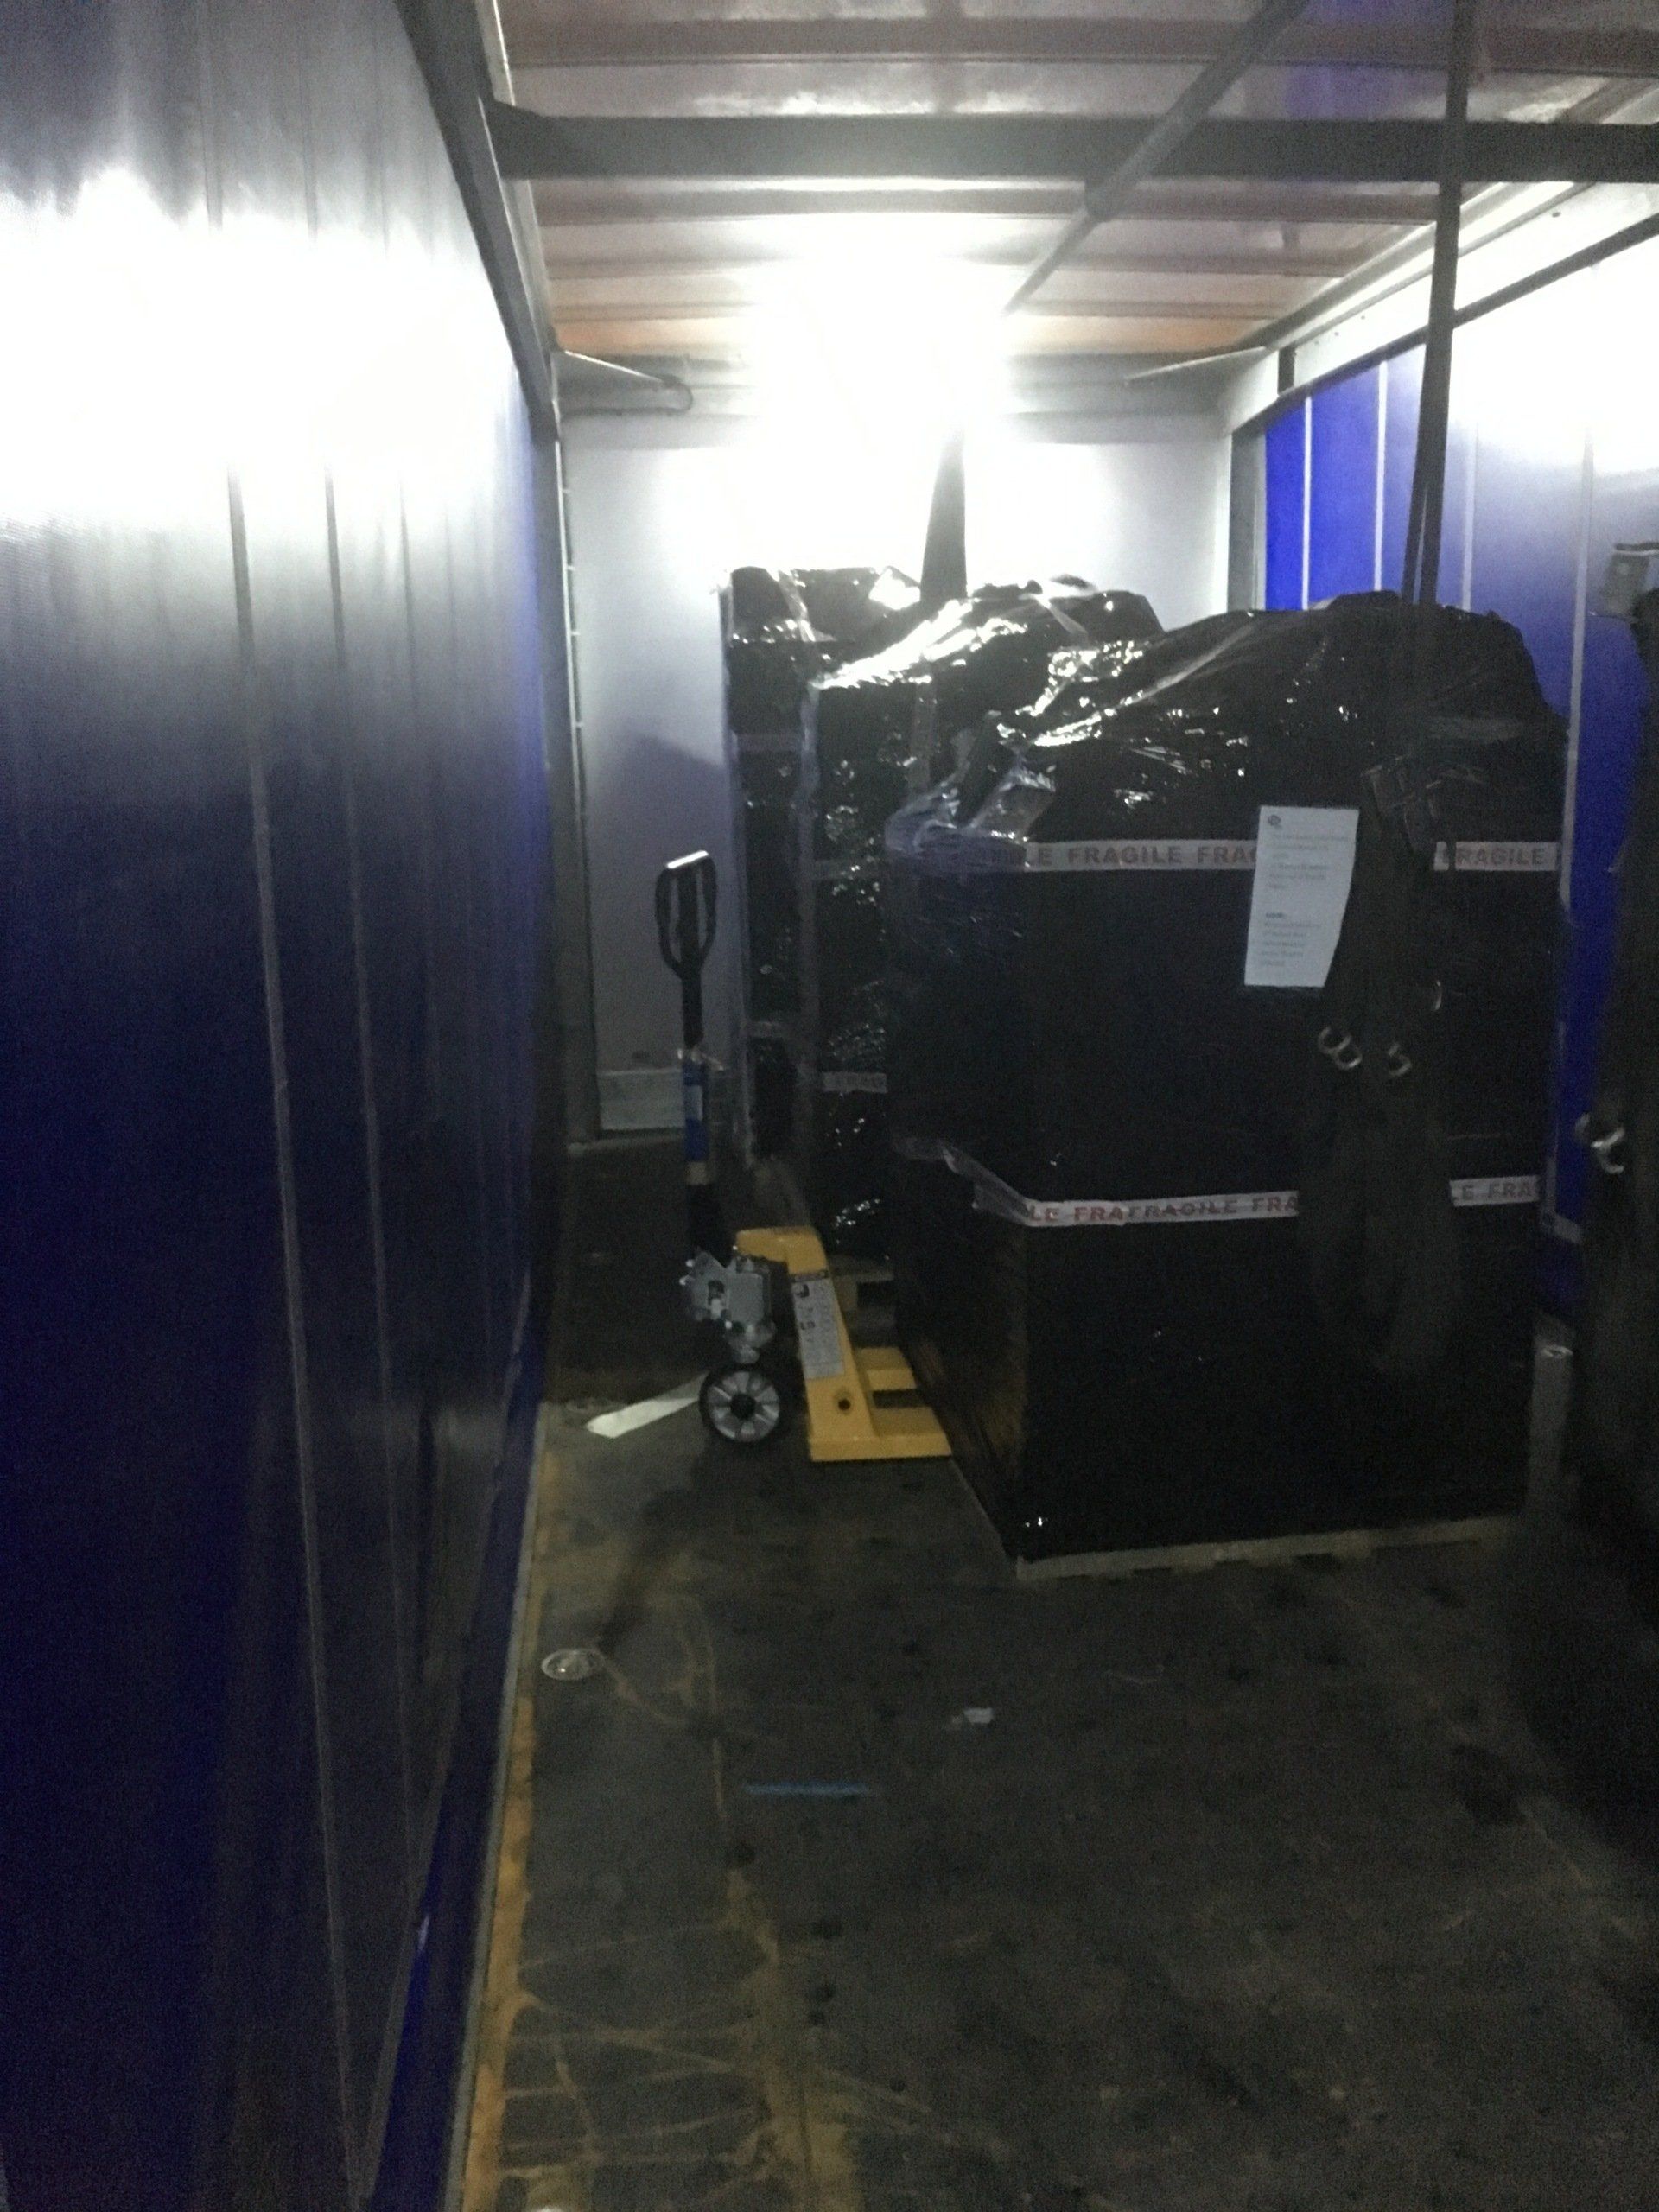 Photograph of collection of 3 pallets of equipment from Automated Spaces